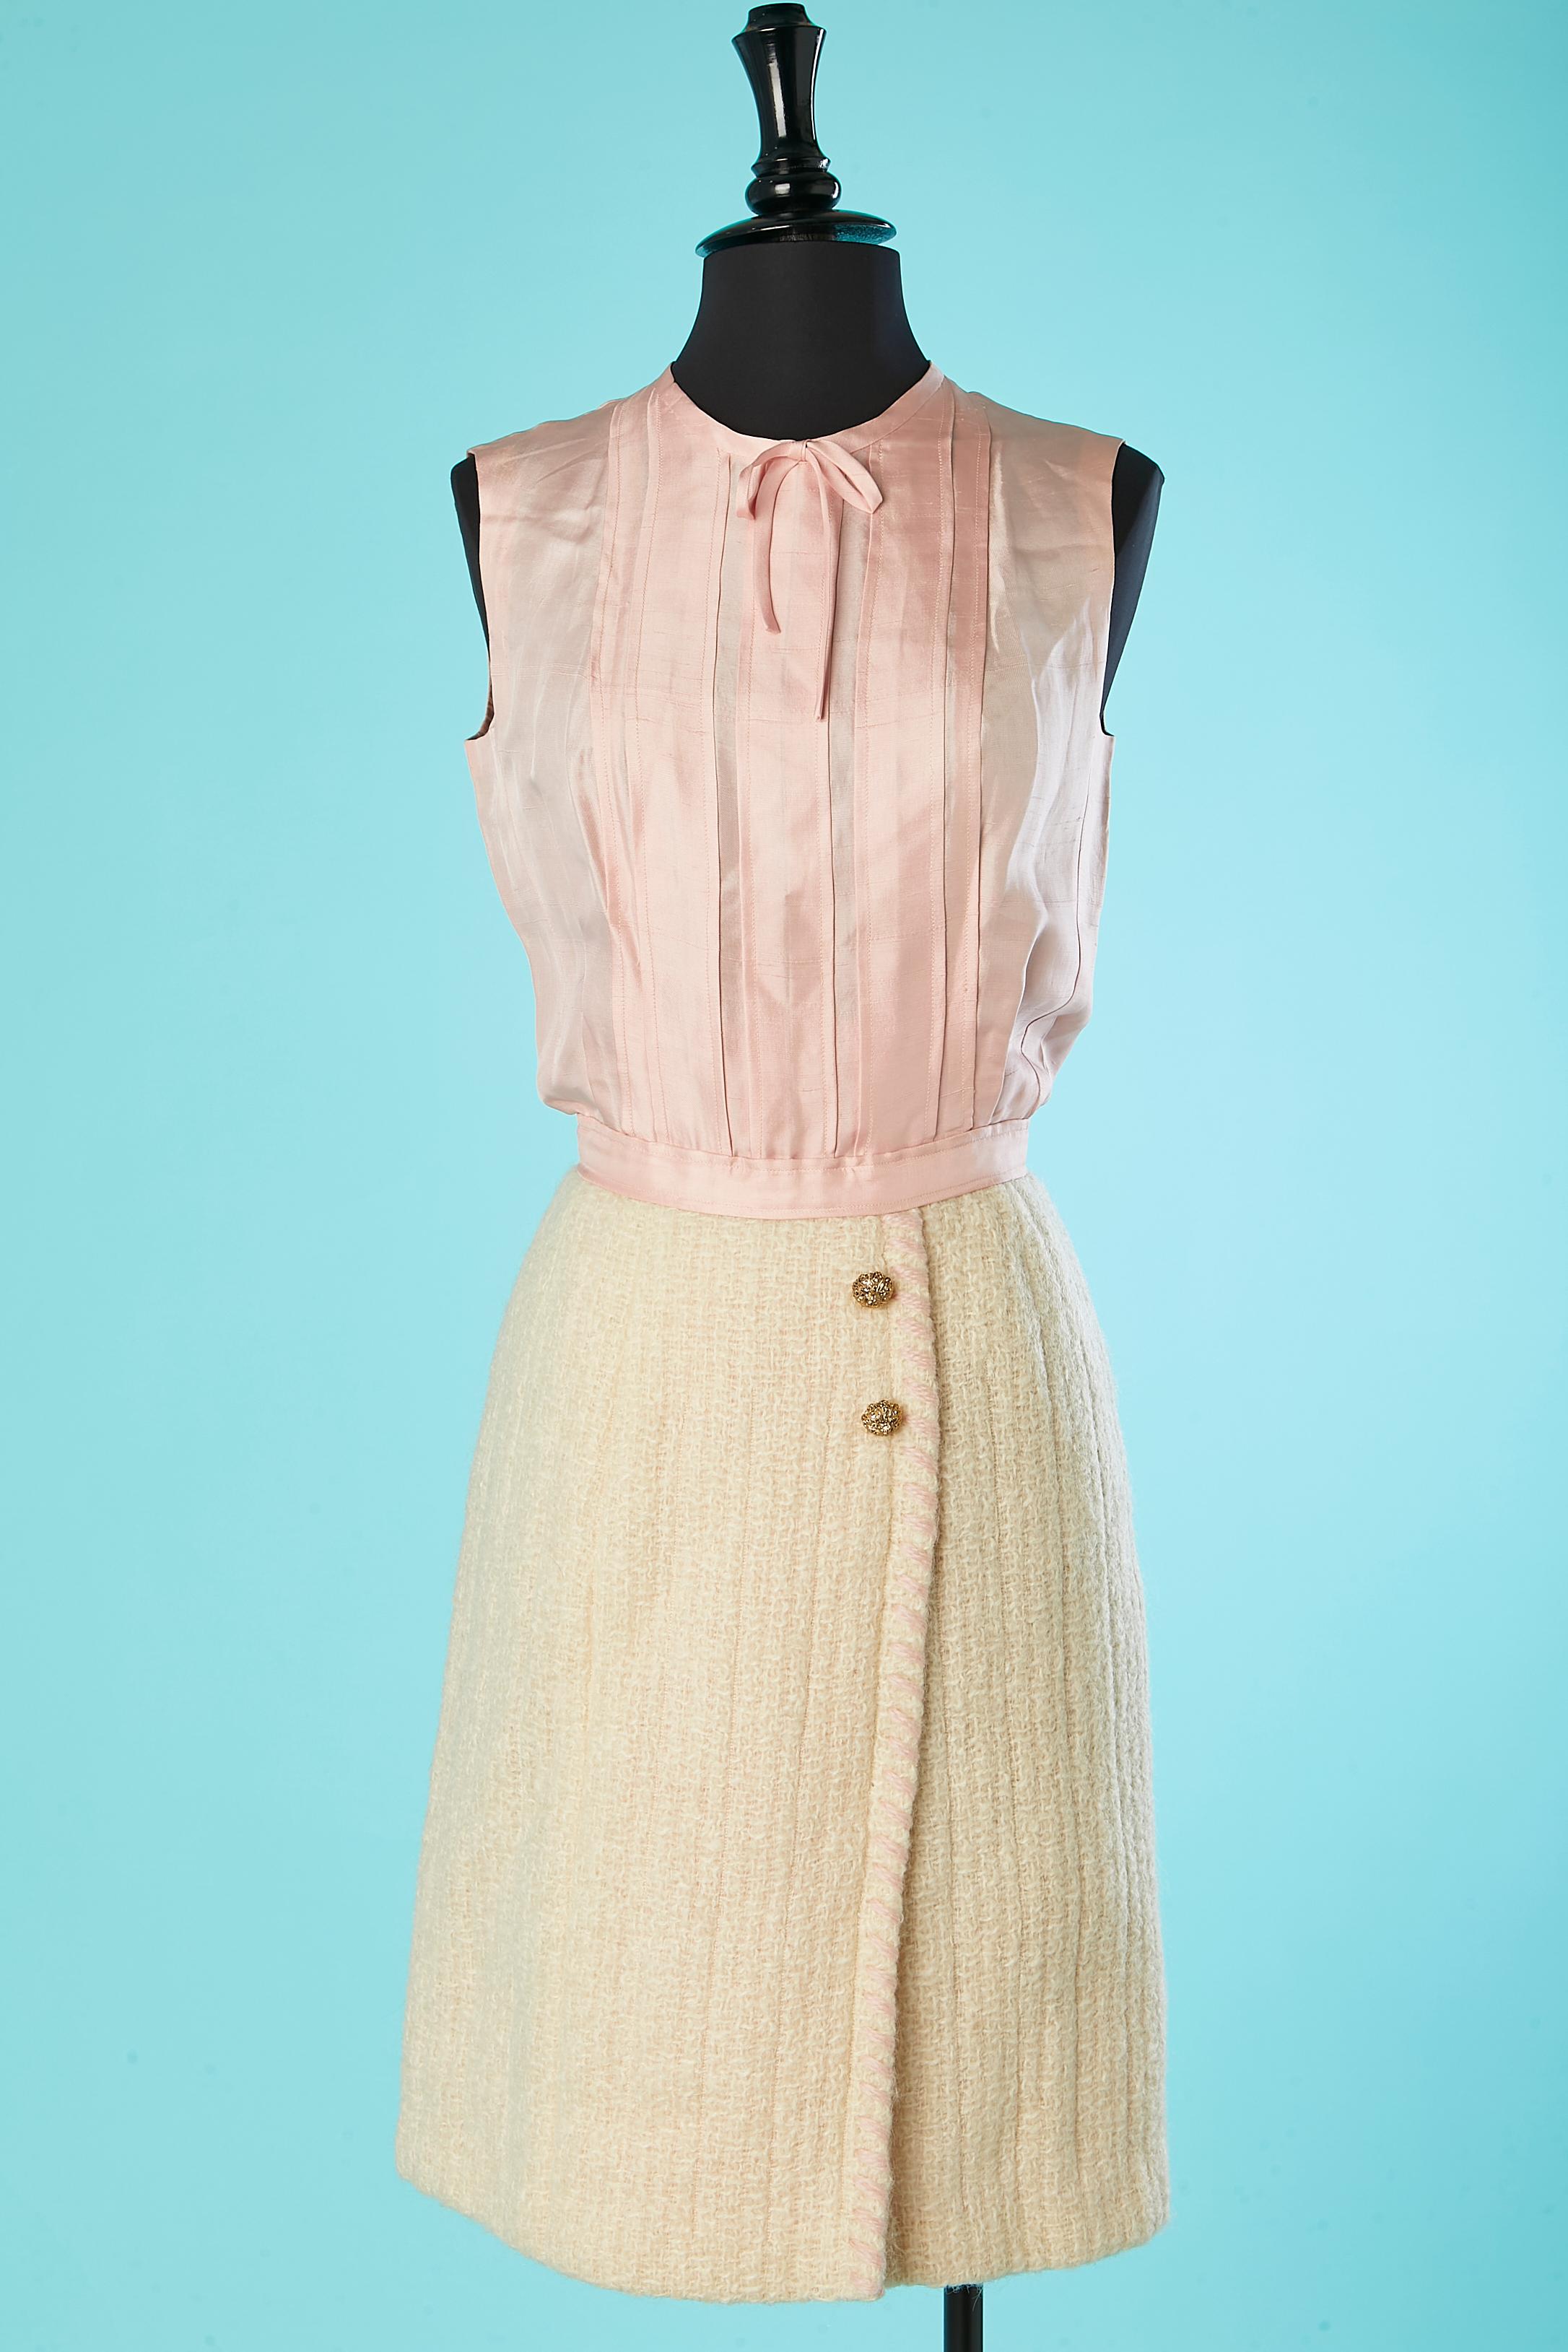 Off-white tweed and pale silk jacket and dress ensemble Chanel 1964  6